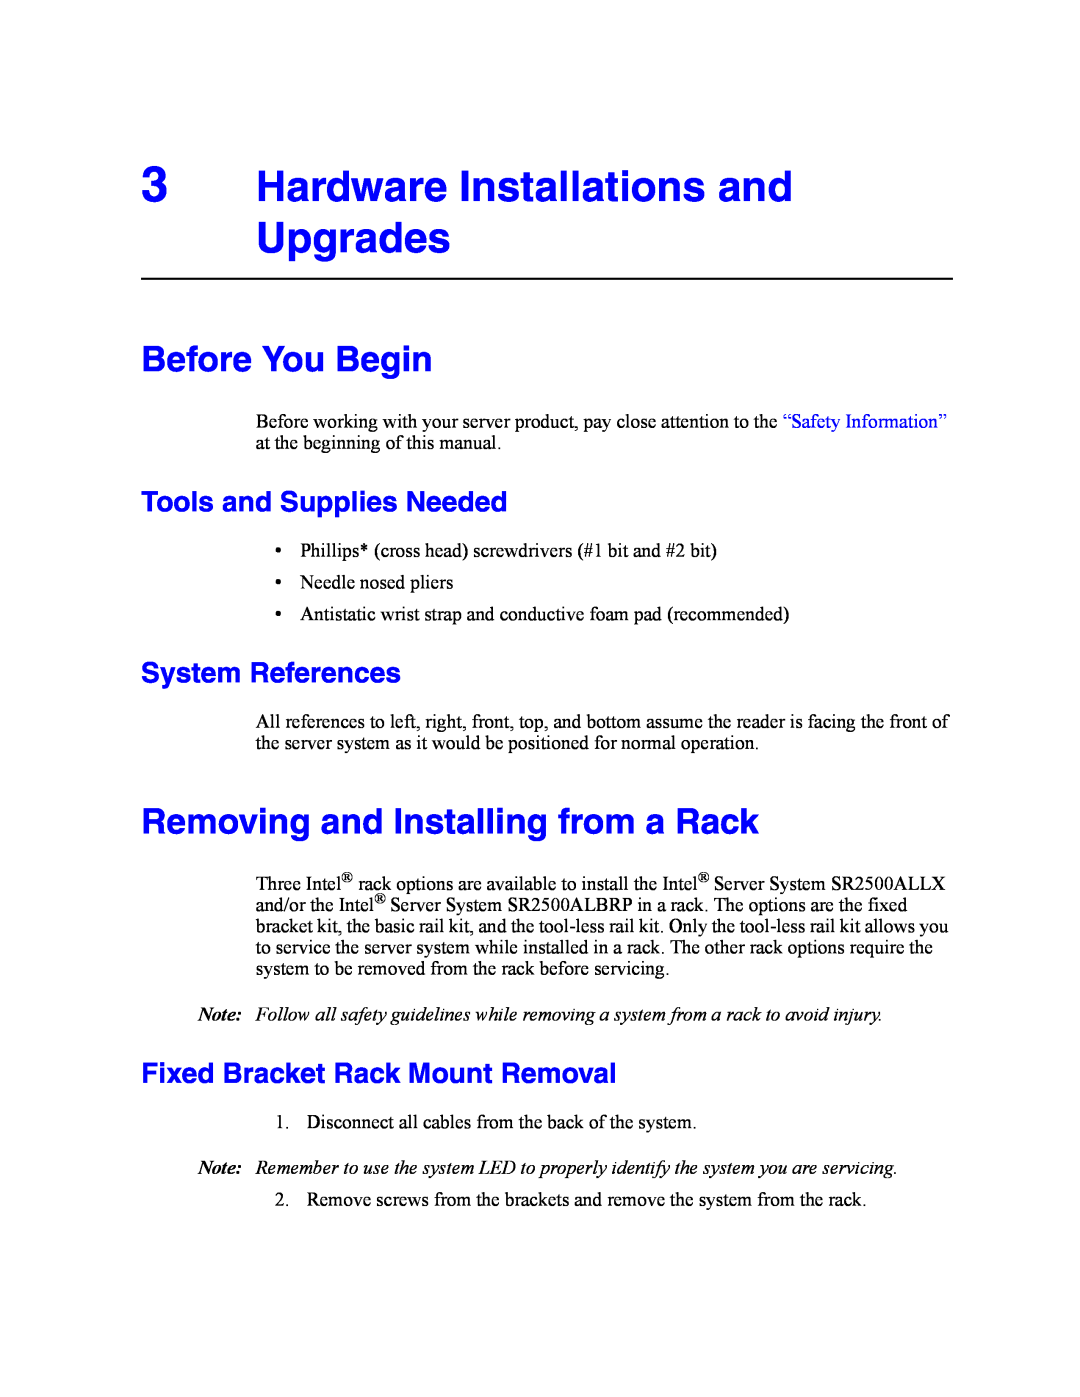 Intel SR2500AL manual Hardware Installations and Upgrades, Before You Begin, Removing and Installing from a Rack 